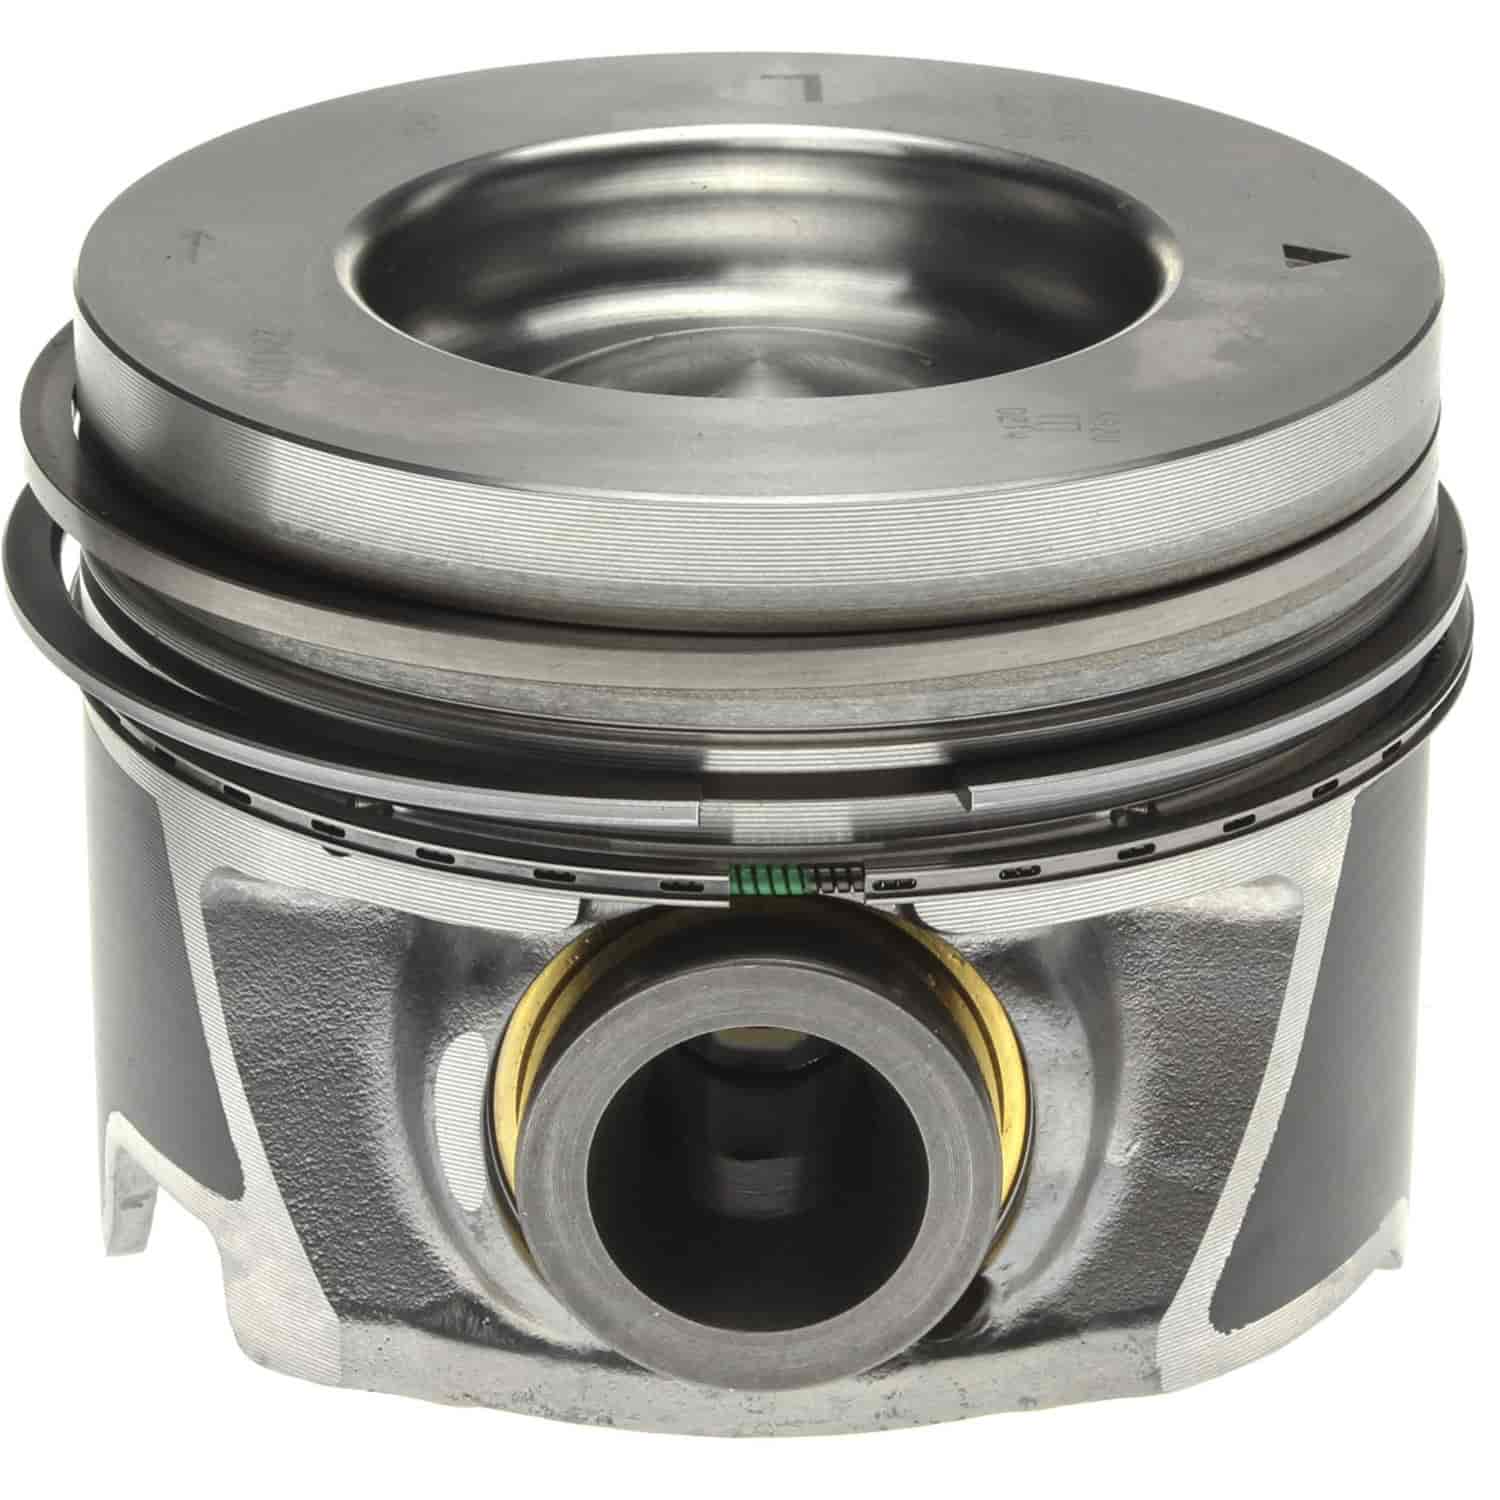 Piston and Rings Set 2006-2010 Chevy/GMC Duramax Diesel V8 6.6L Left Bank with 4.095" Bore (+.040")